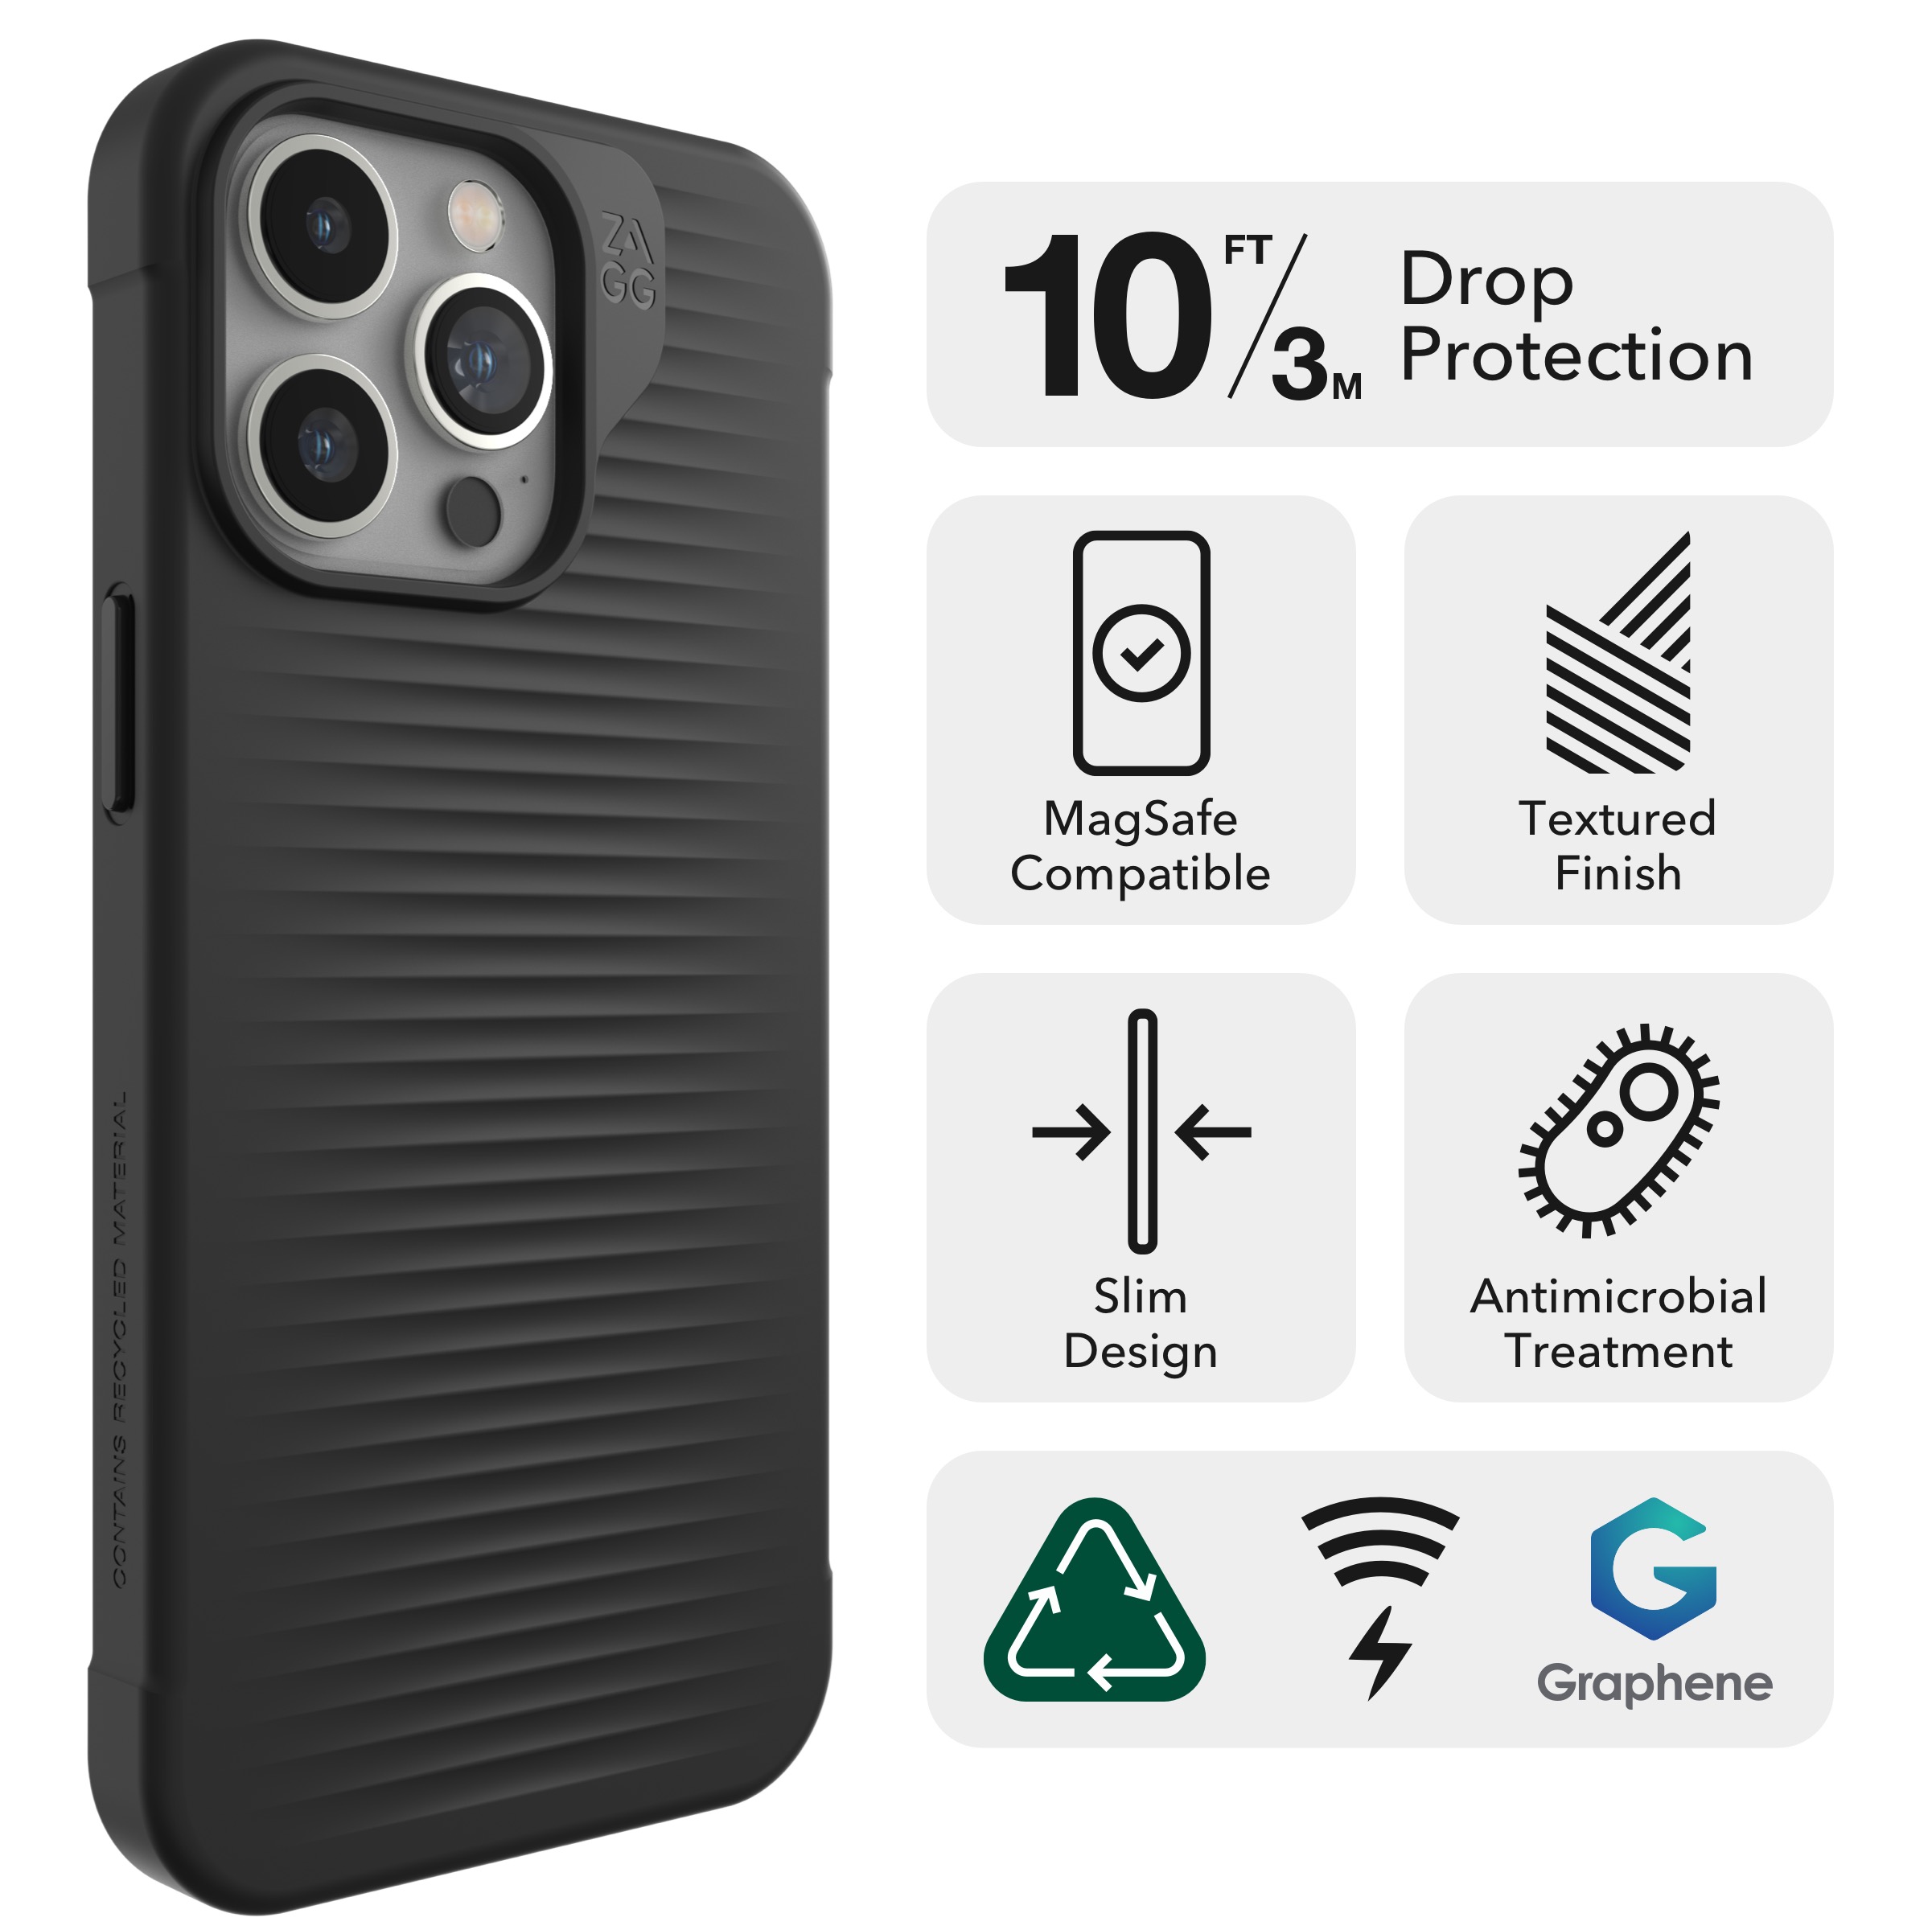 10ft│3m Drop Protection
||Luxe has been tested and proven to protect your phone from drops up to 10 feet (3 meters).